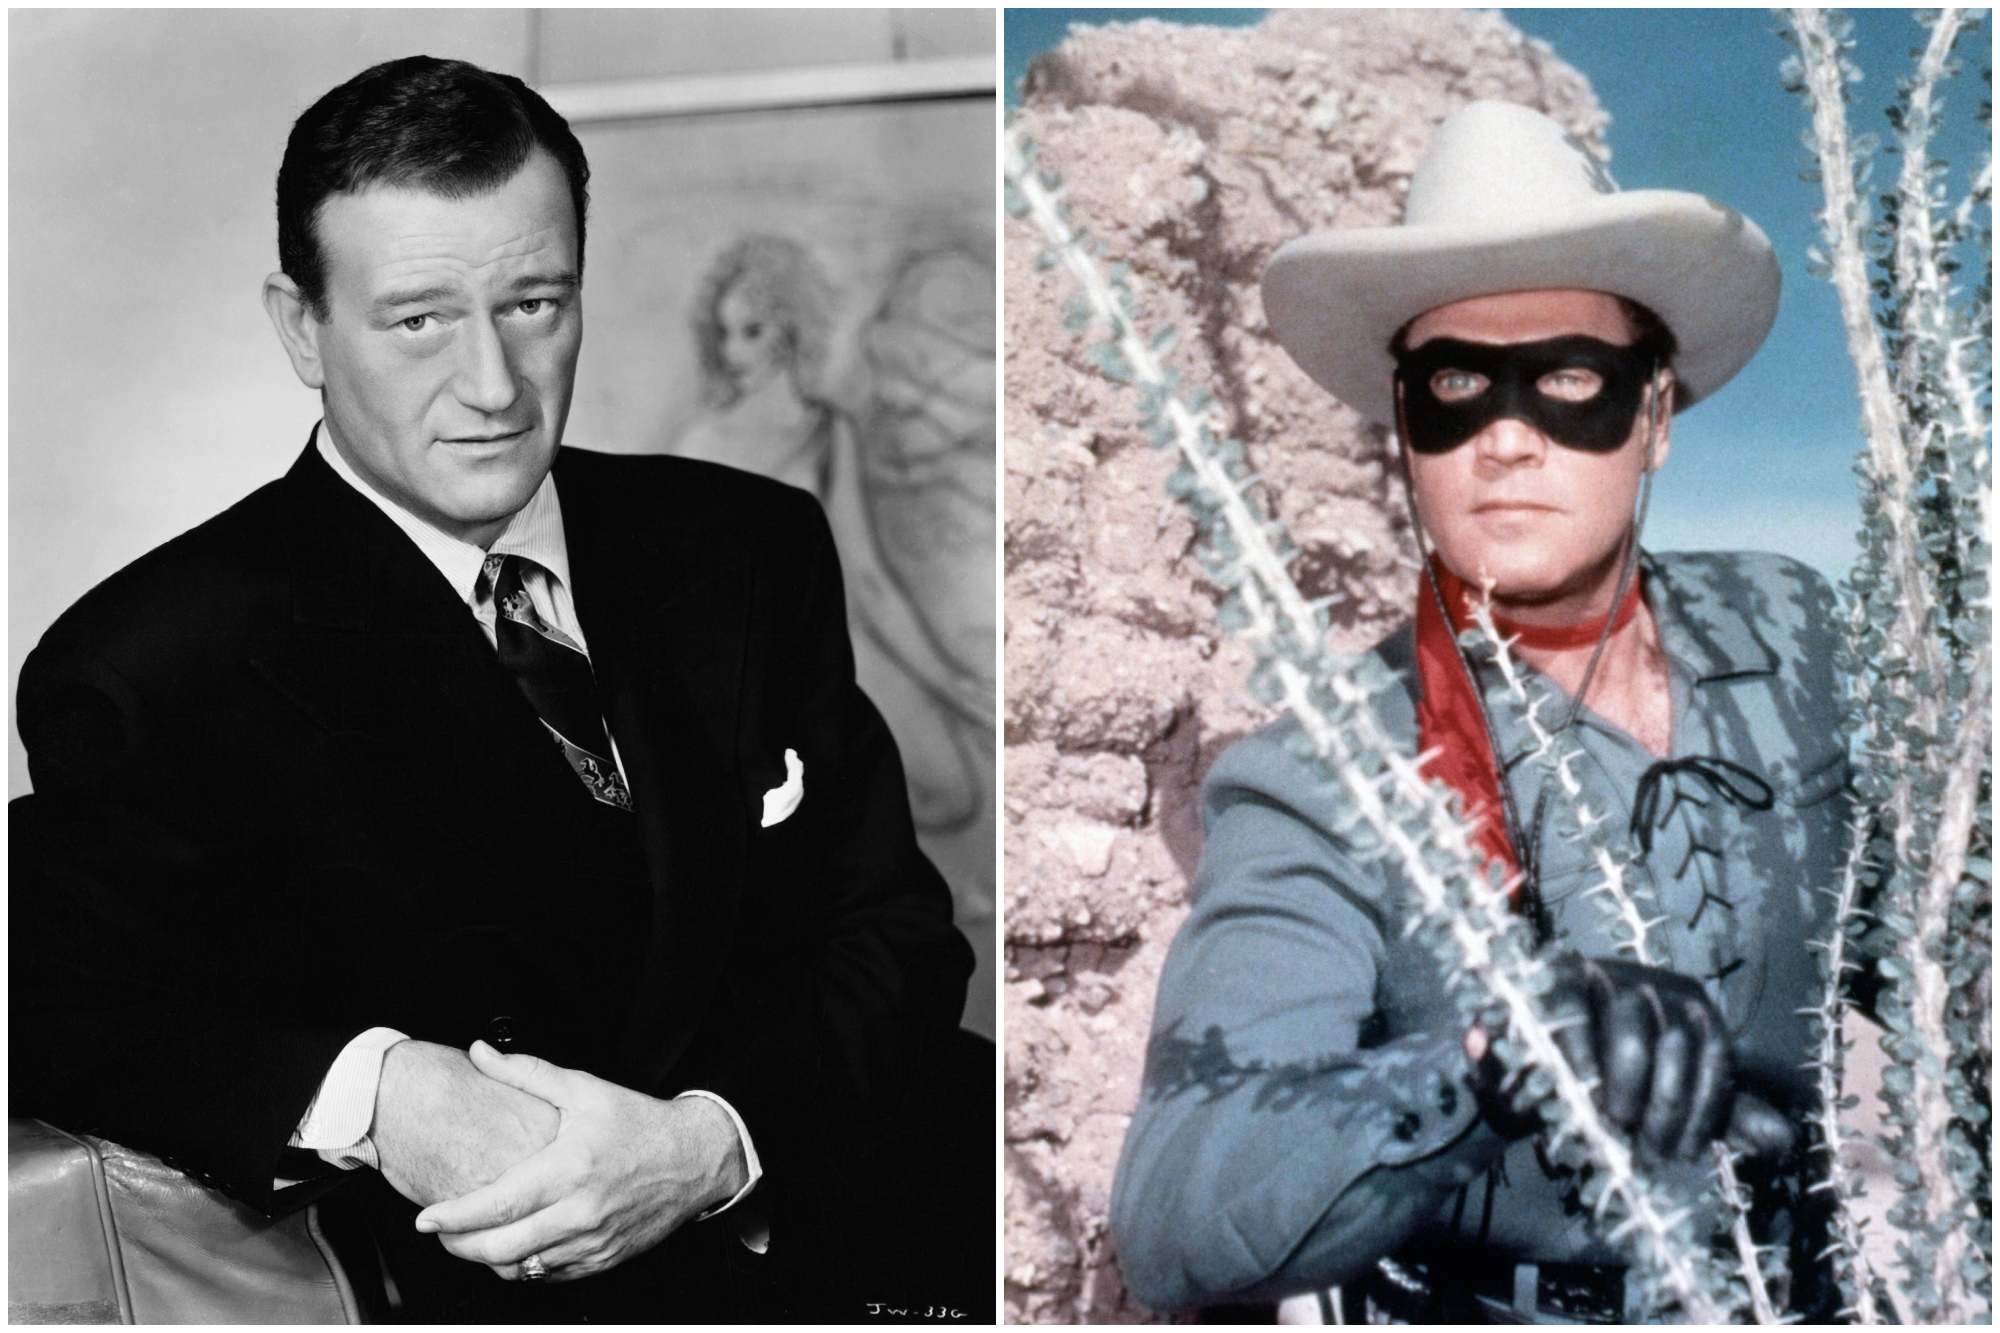 John Wayne and 'The Lone Ranger' actor Clayton Moore. Wayne is sitting in a suit and tie with his hands crossed. Moore is hiding behind tree branches, wearing his Lone Ranger costume.